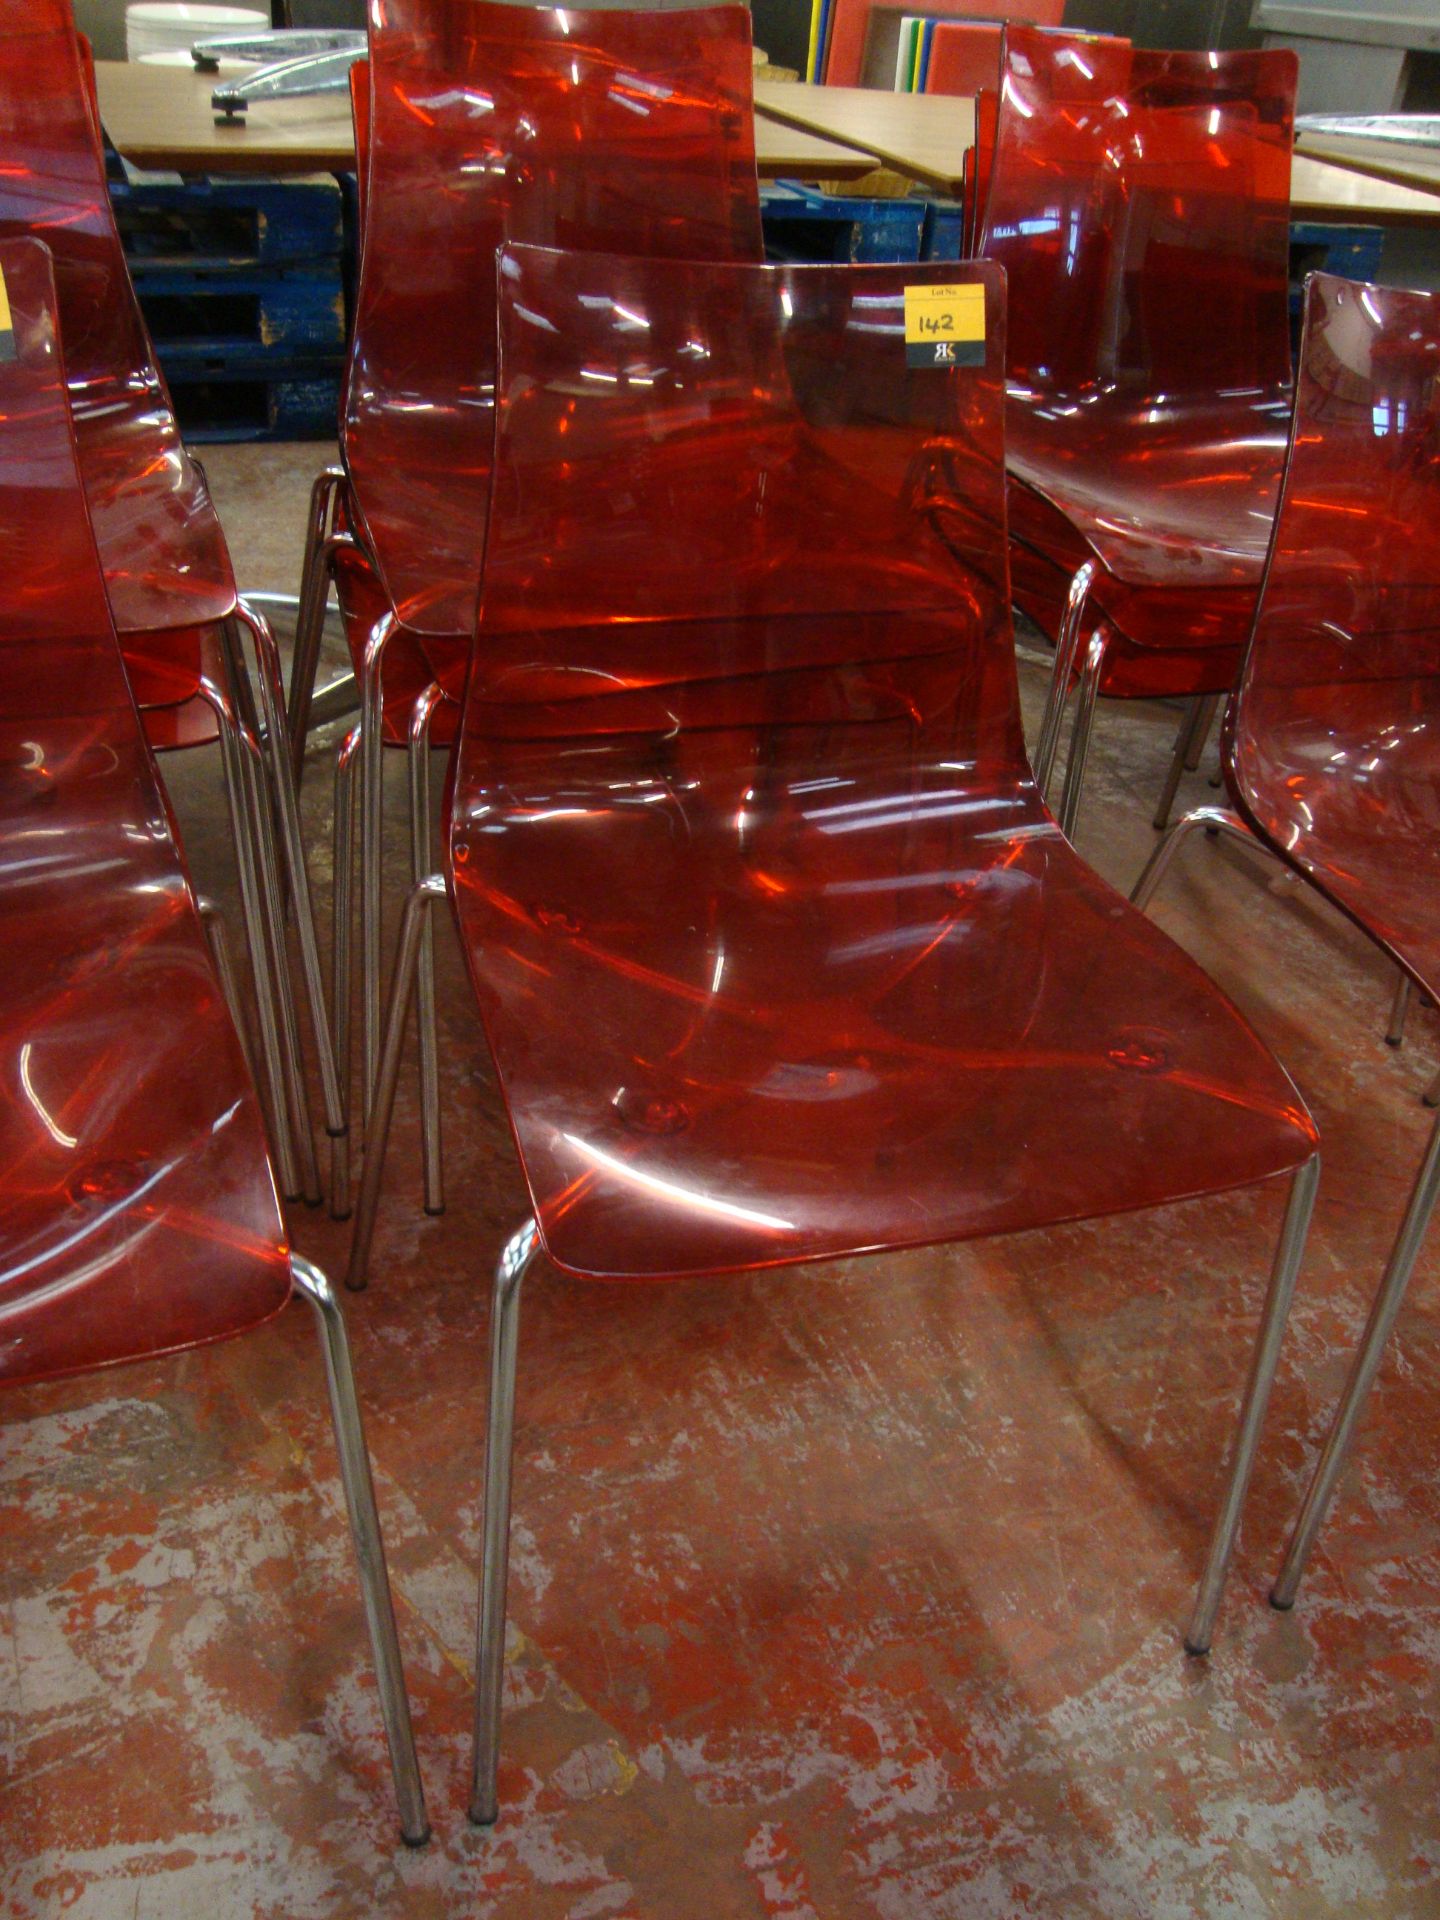 4 off matching red clear plastic chairs on metal legs. NB lots 138 - 145 consist of different - Image 2 of 2